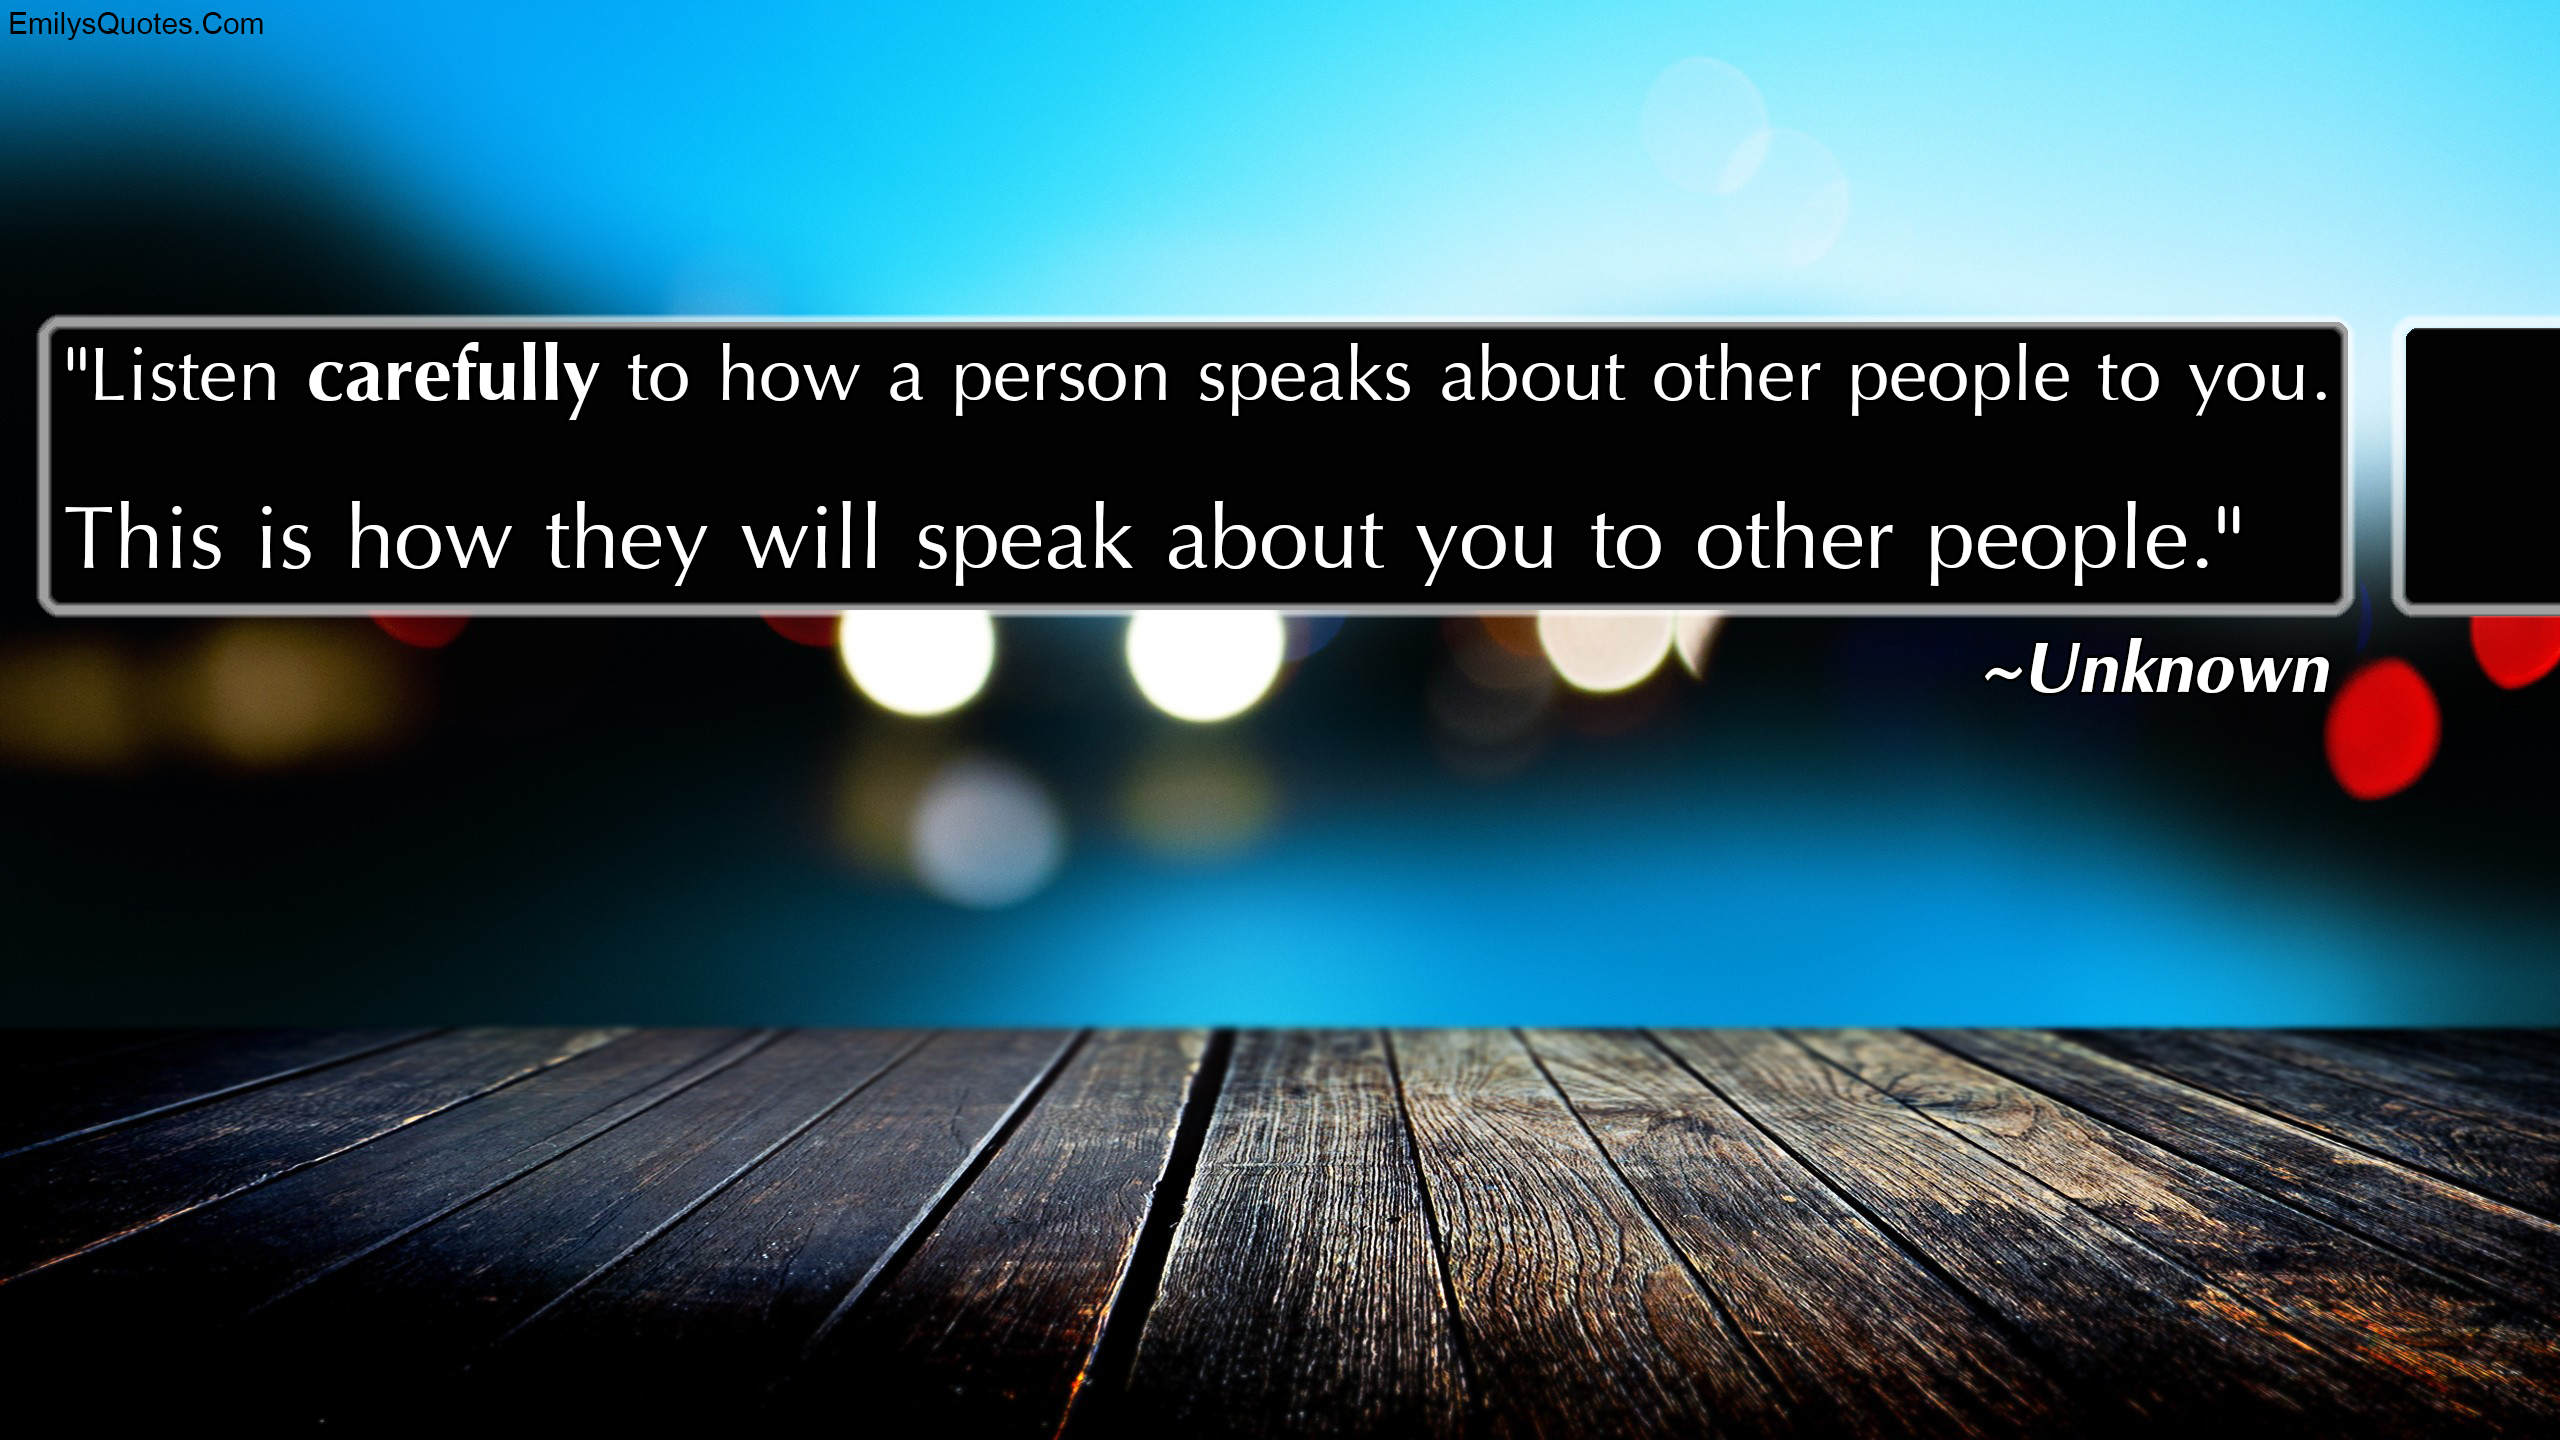 Listen carefully to how a person speaks about other people to you. This is how they will speak about you to other people